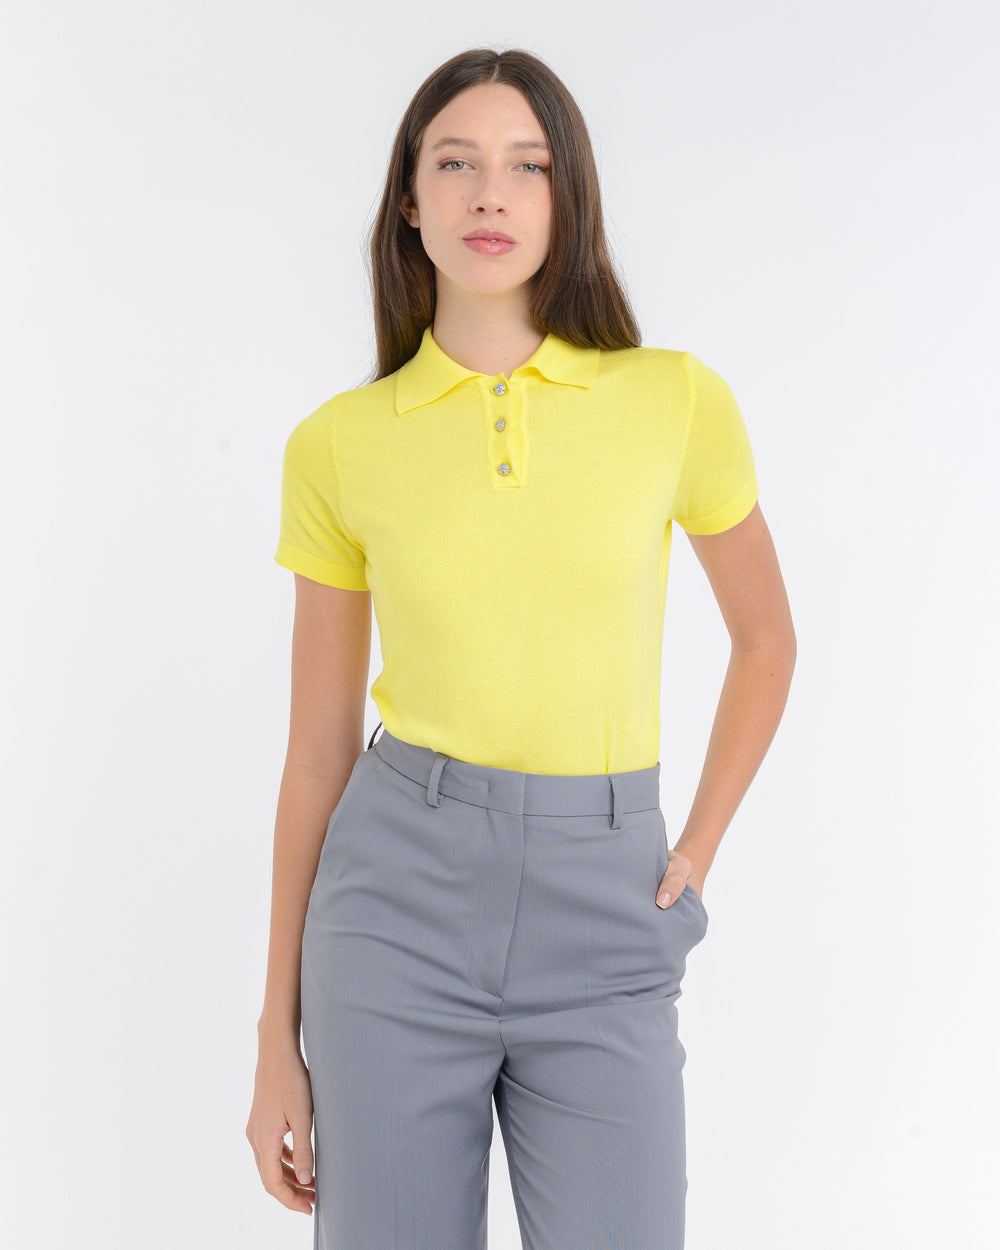 yellow cotton polo shirt with jewel button